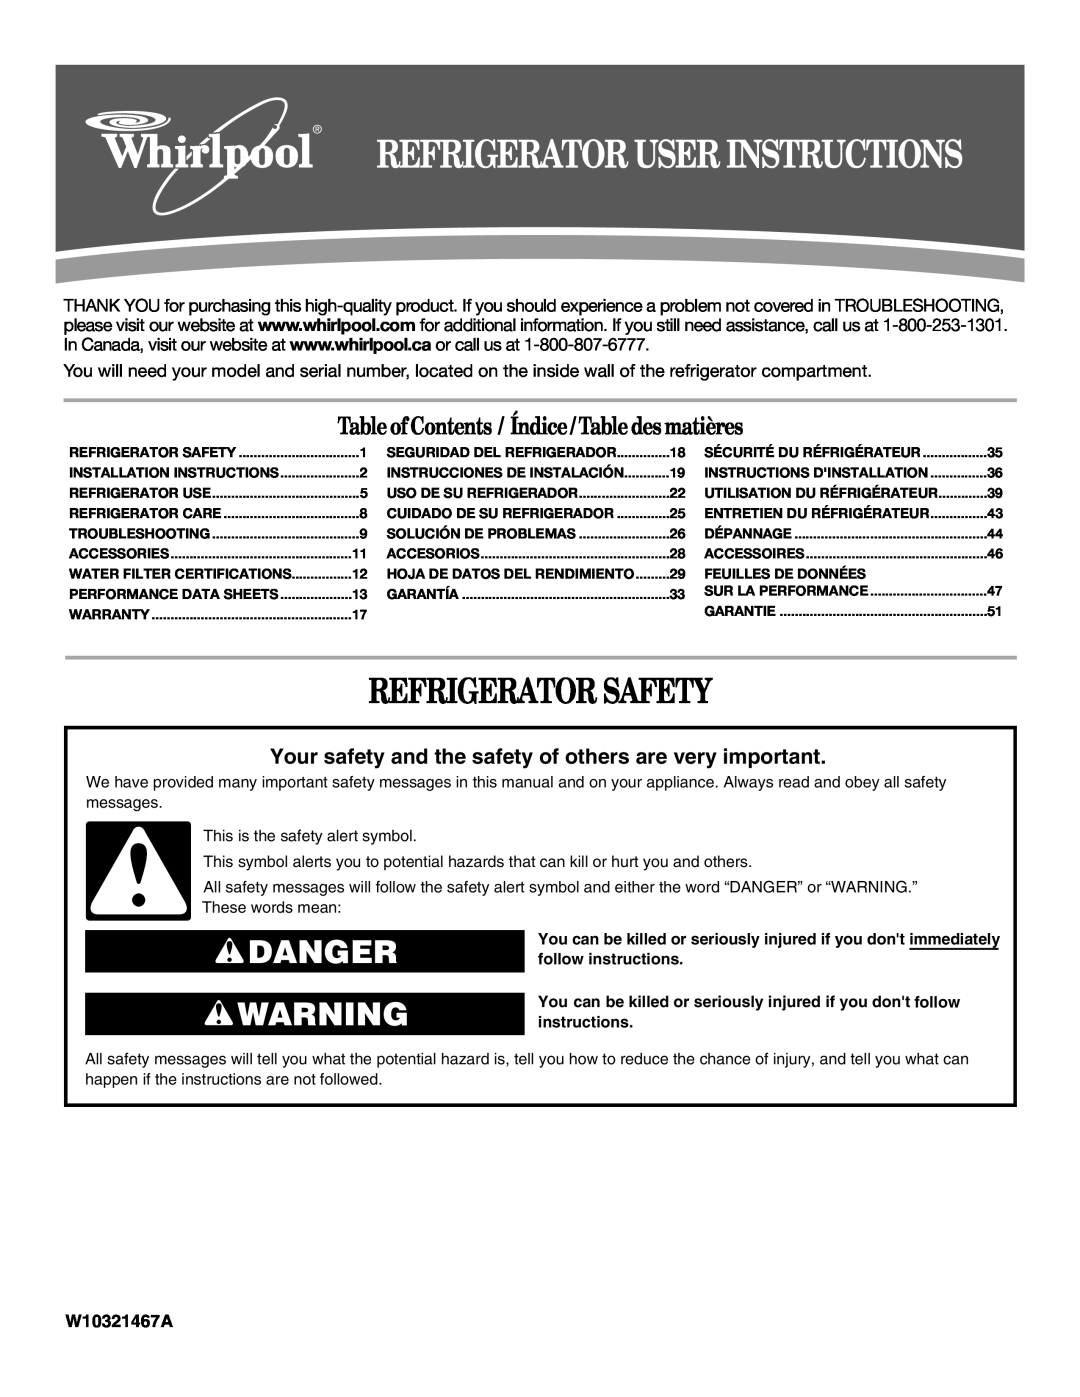 Whirlpool W10321467A installation instructions Refrigerator Safety, Danger, Table ofContents / Índice / Table des matières 